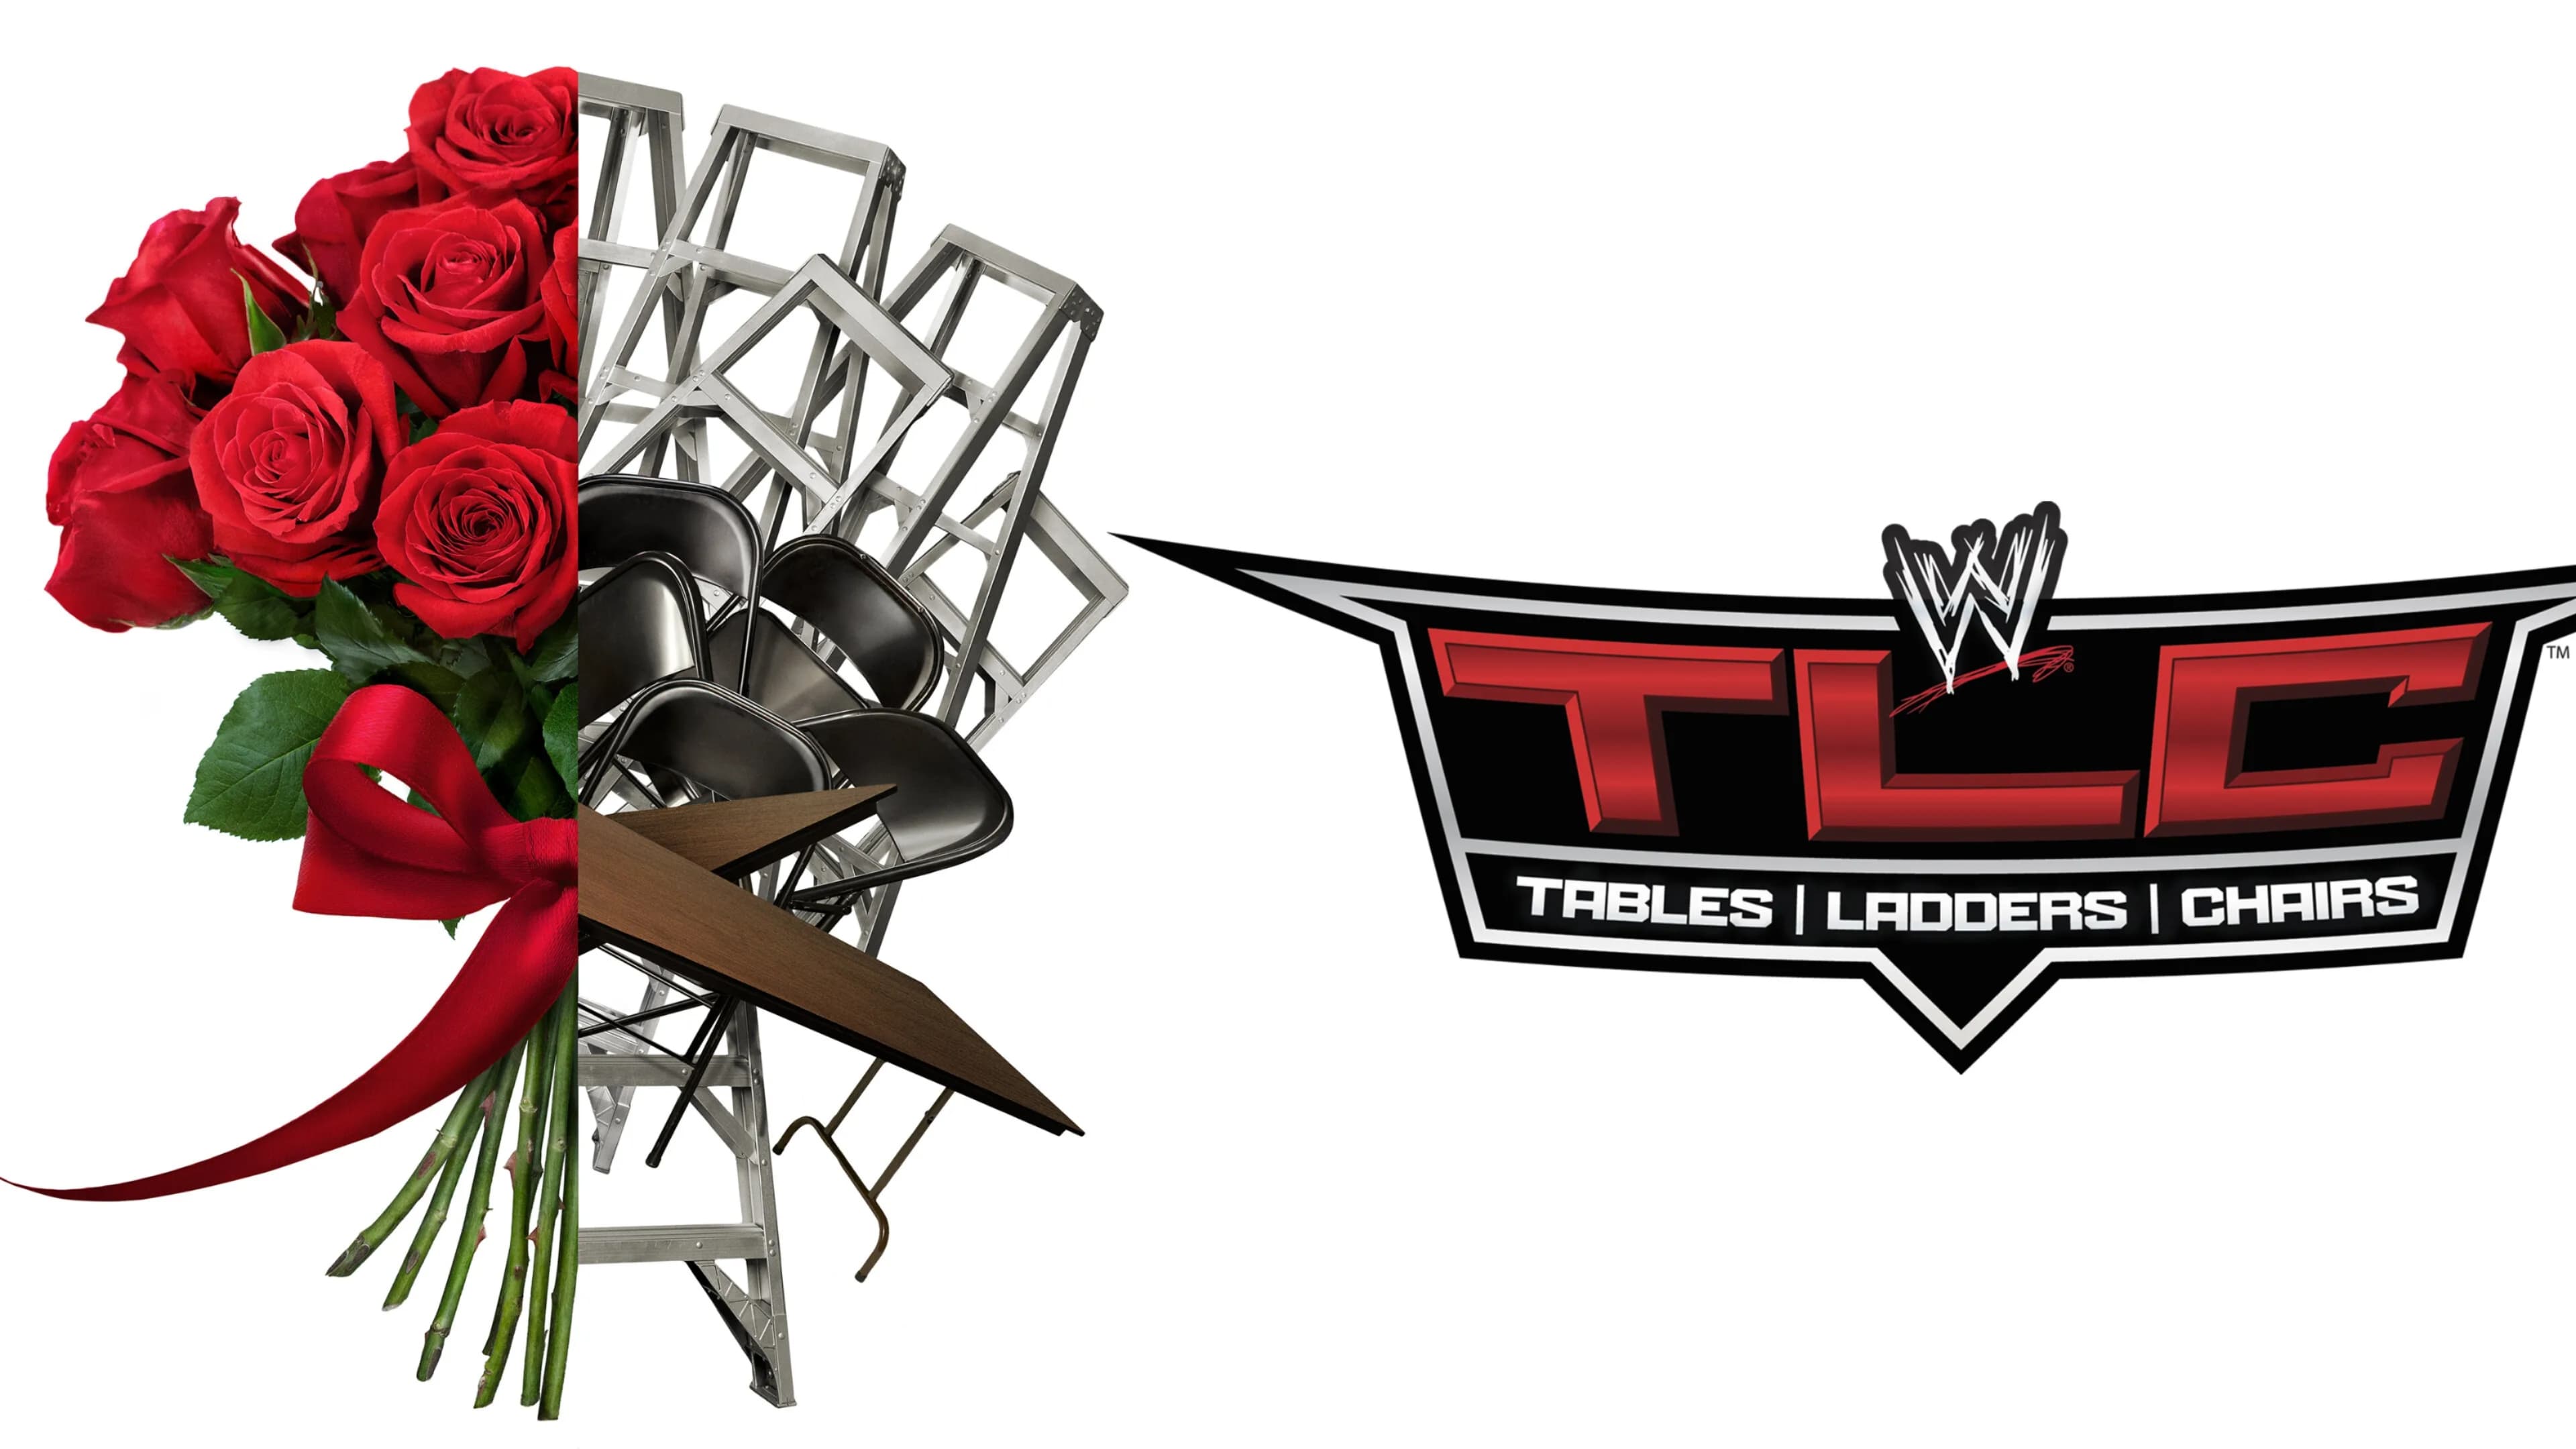 WWE TLC Tables Ladders & Chairs 2013